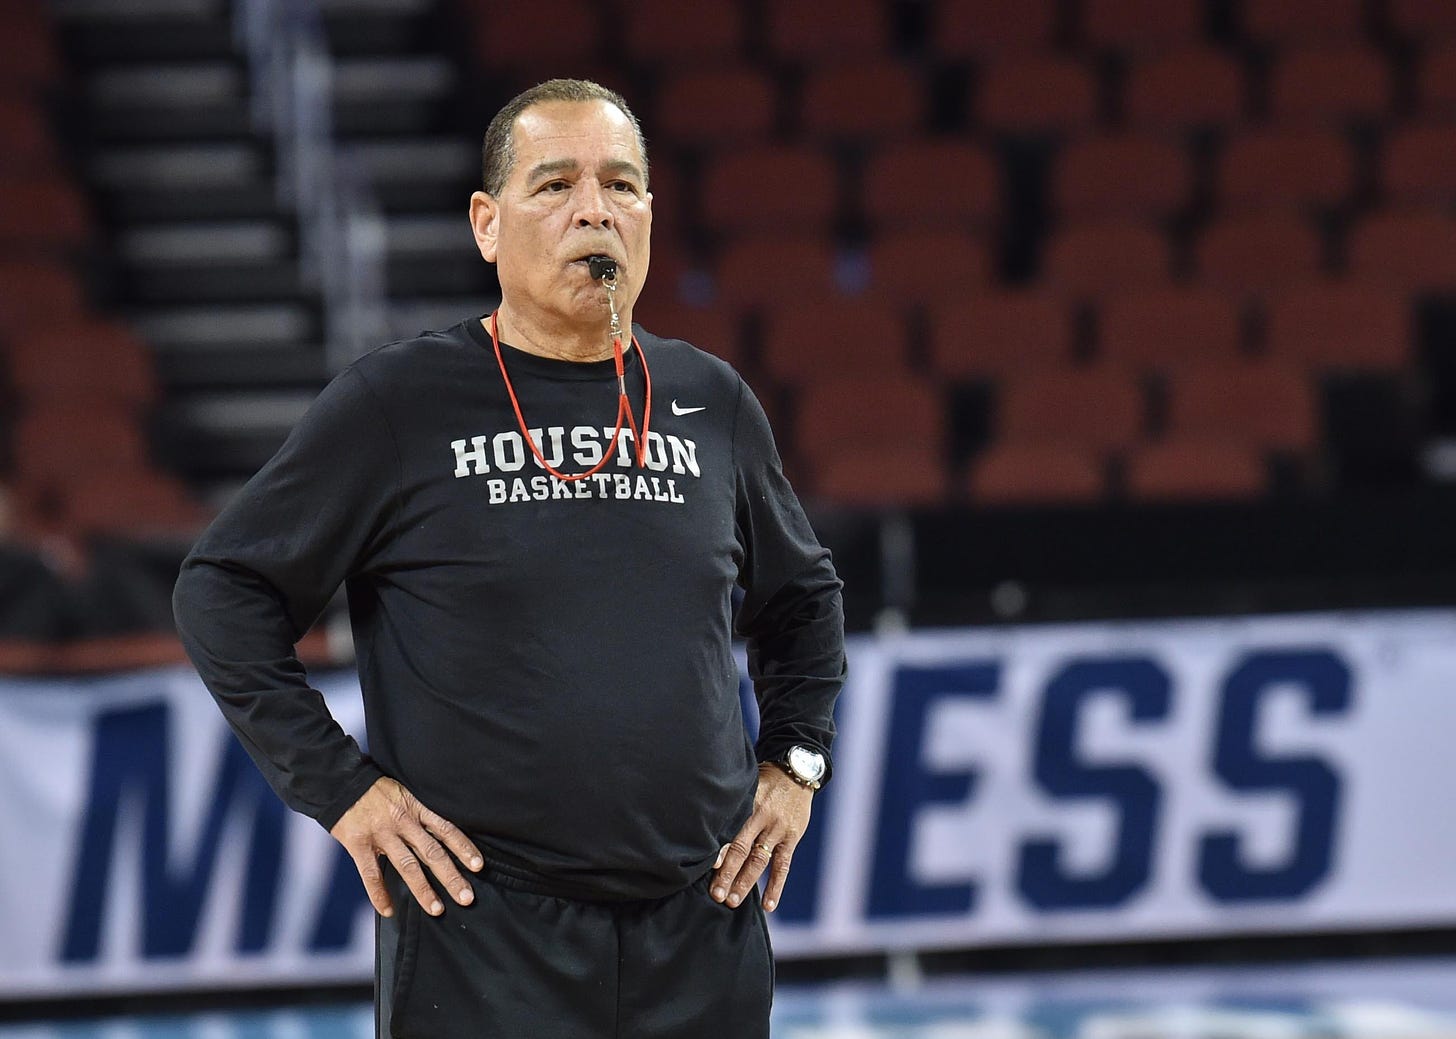 NCAA violations forced him out at IU, Kelvin Sampson now thriving at Houston